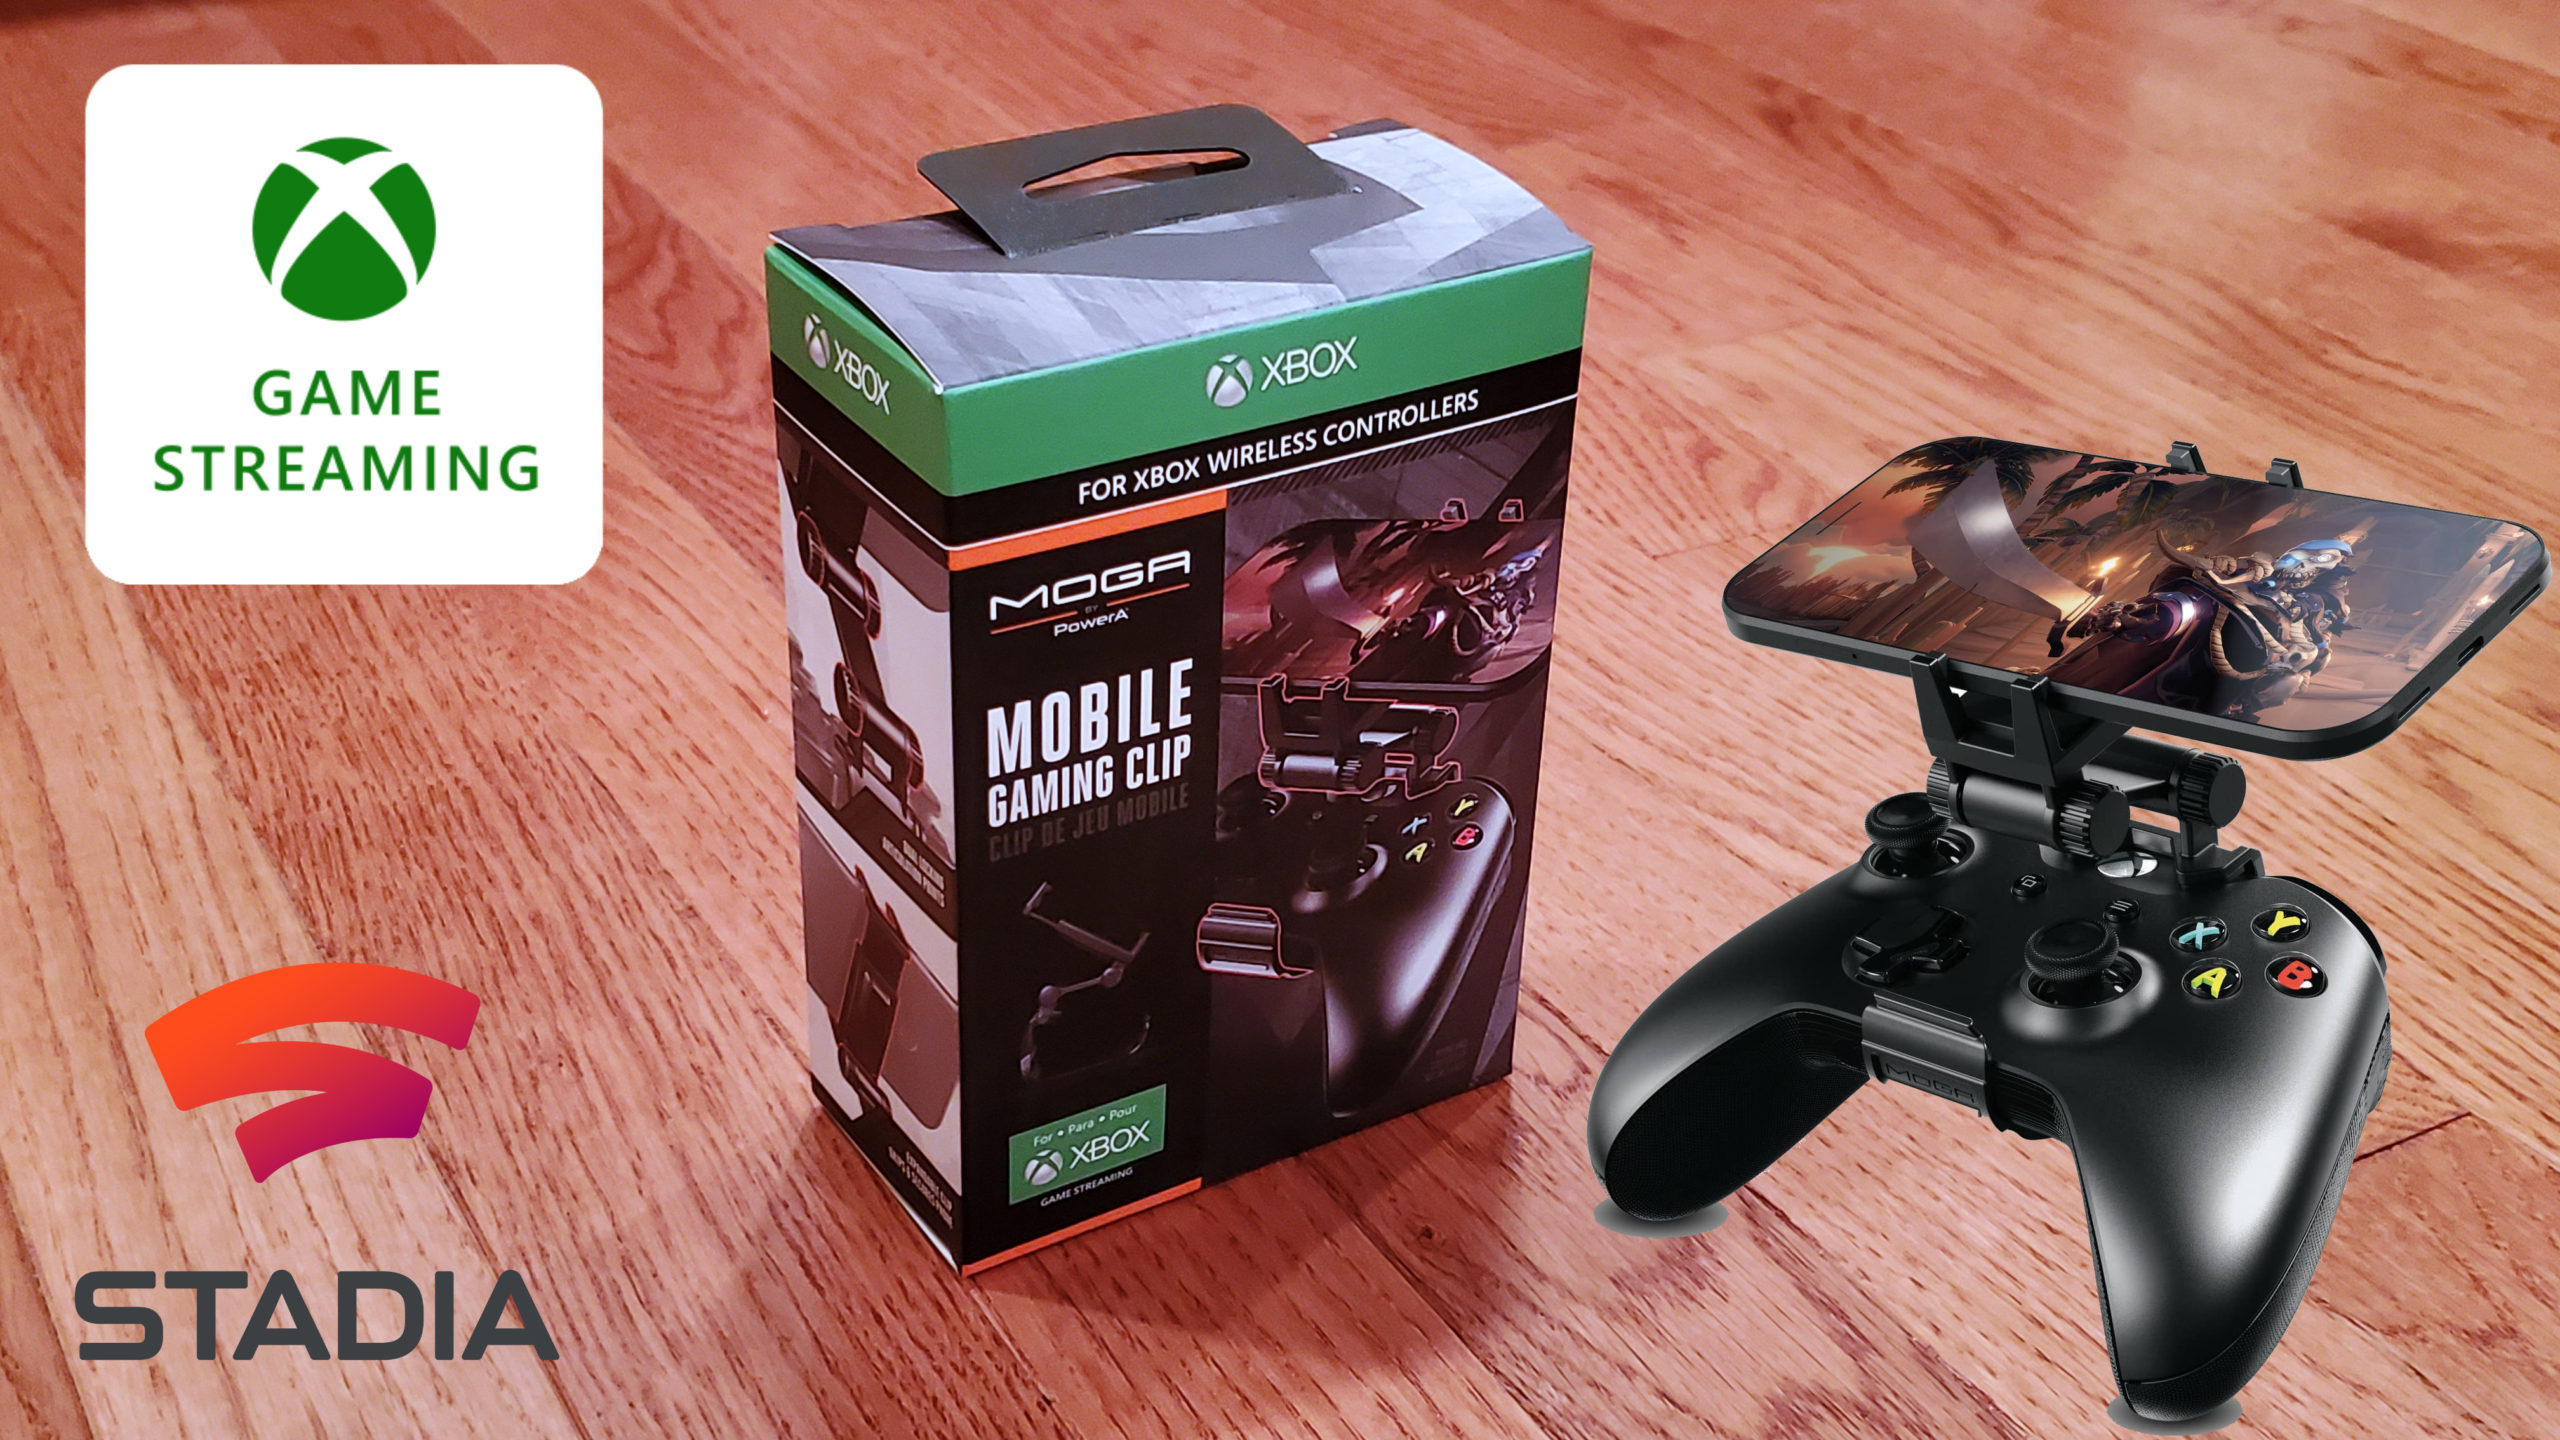 genie Ster lancering Review: PowerA MOGA Mobile Gaming Clip for Xbox Wireless Controllers |  TechAutos